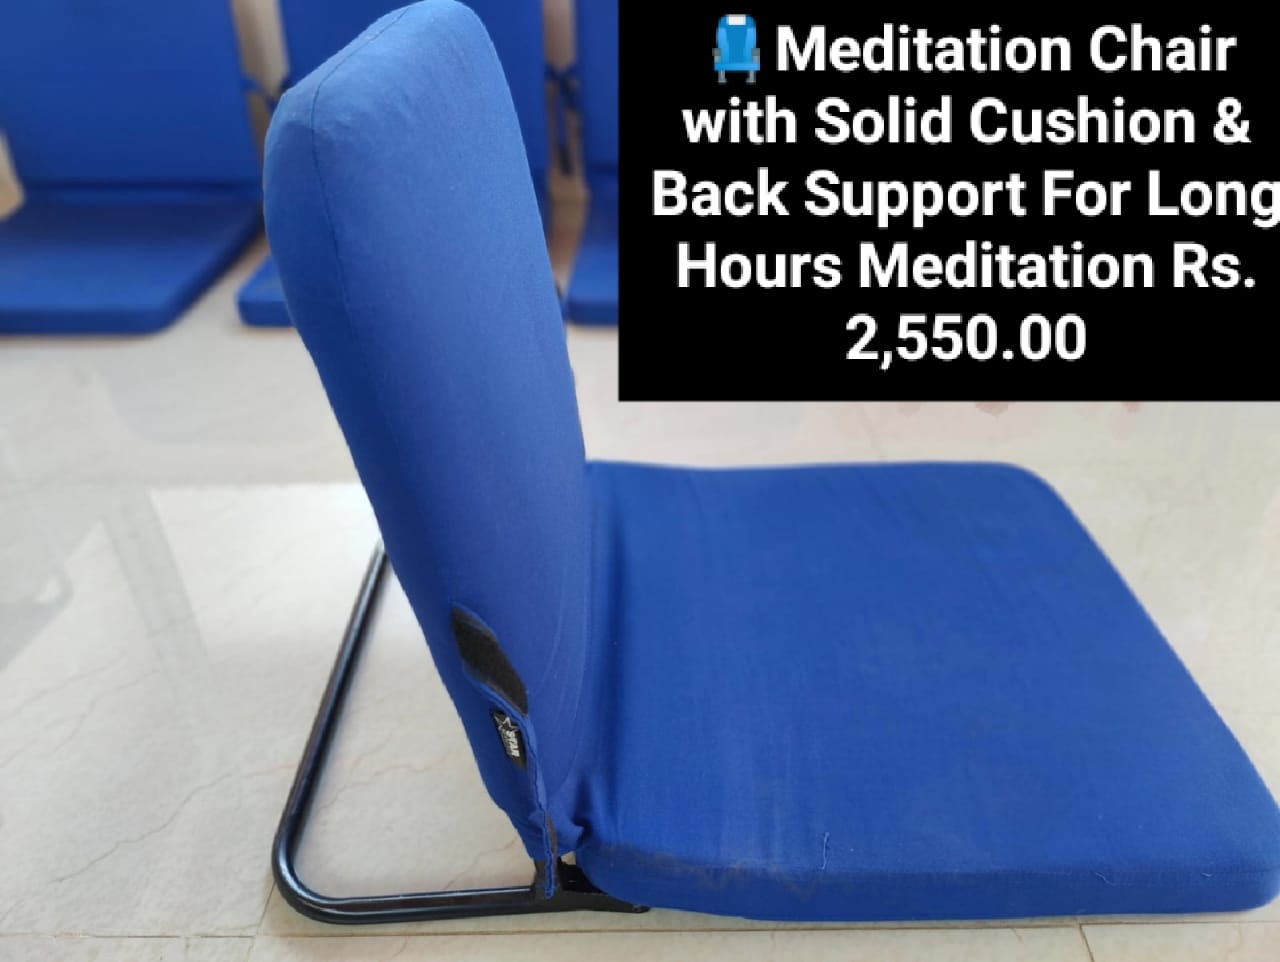 Meditation Chair with Solid Cushion & Back Support For Long Hours Meditation